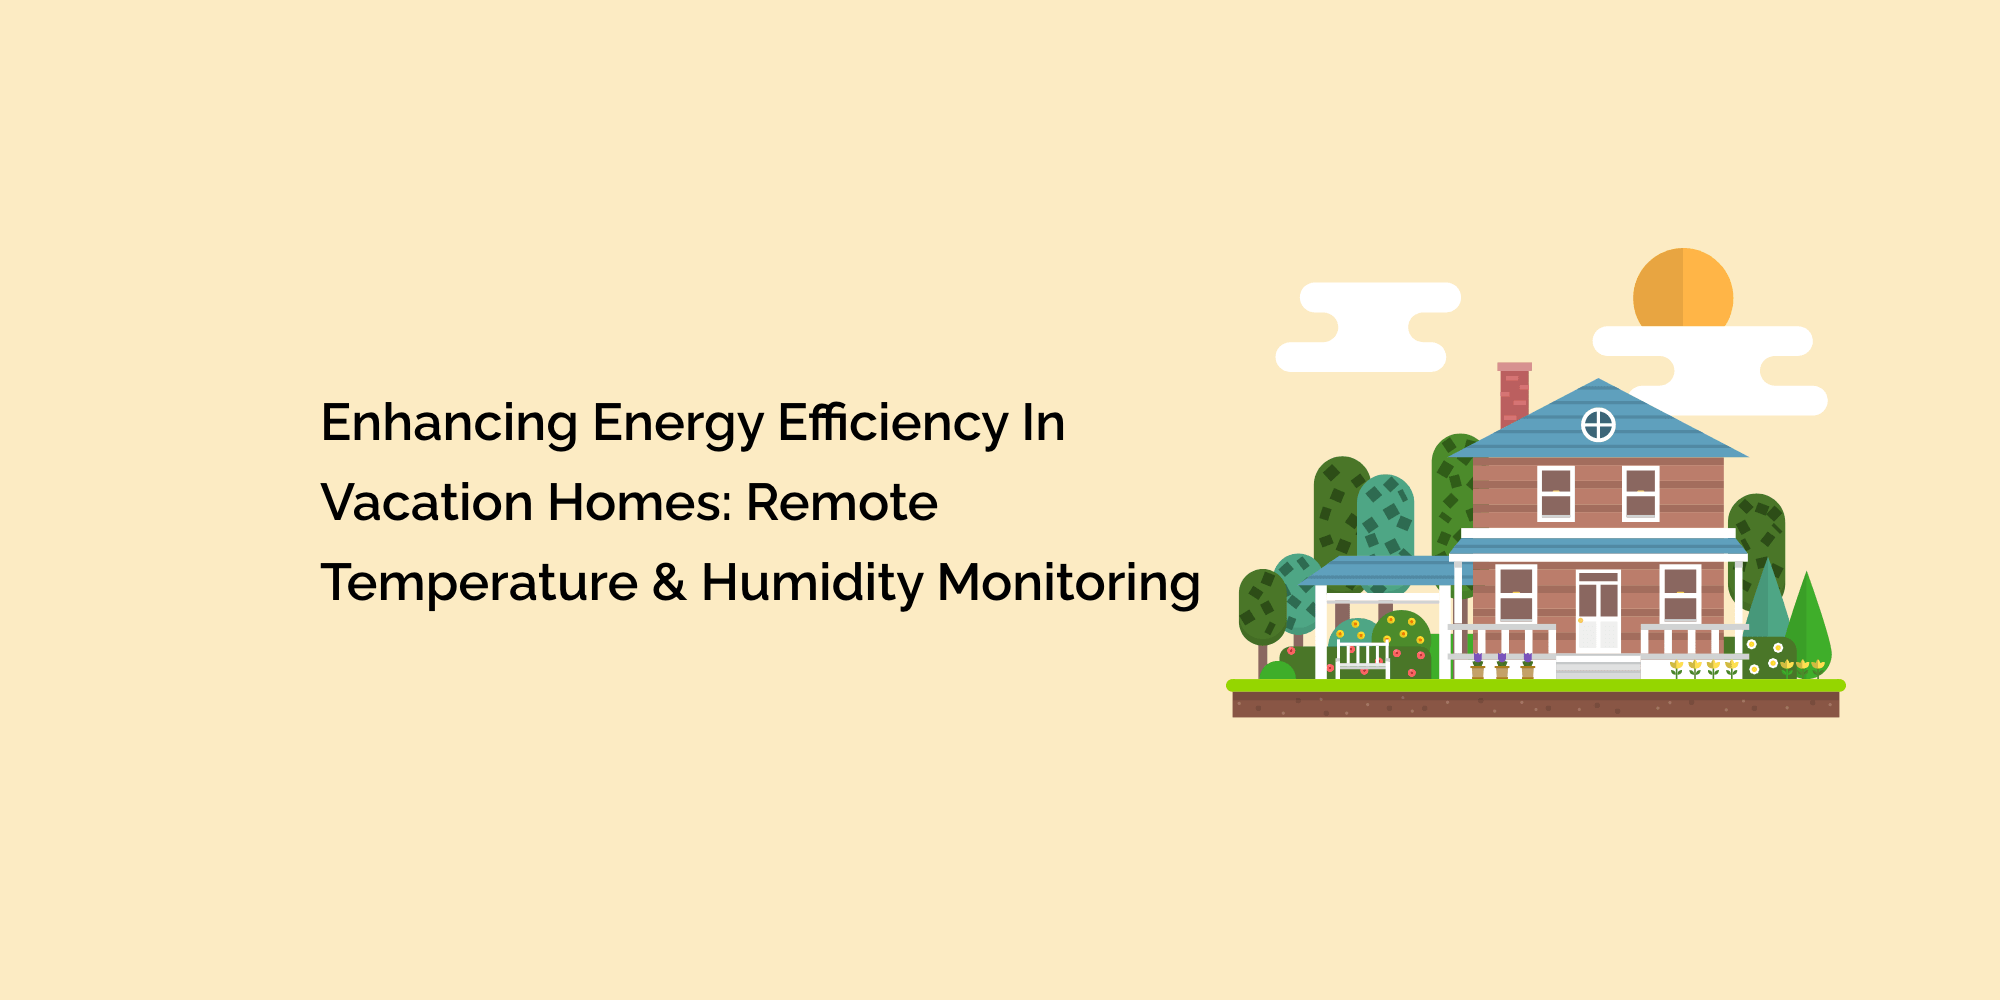 Enhancing Energy Efficiency in Vacation Homes: Remote Temperature and Humidity Monitoring